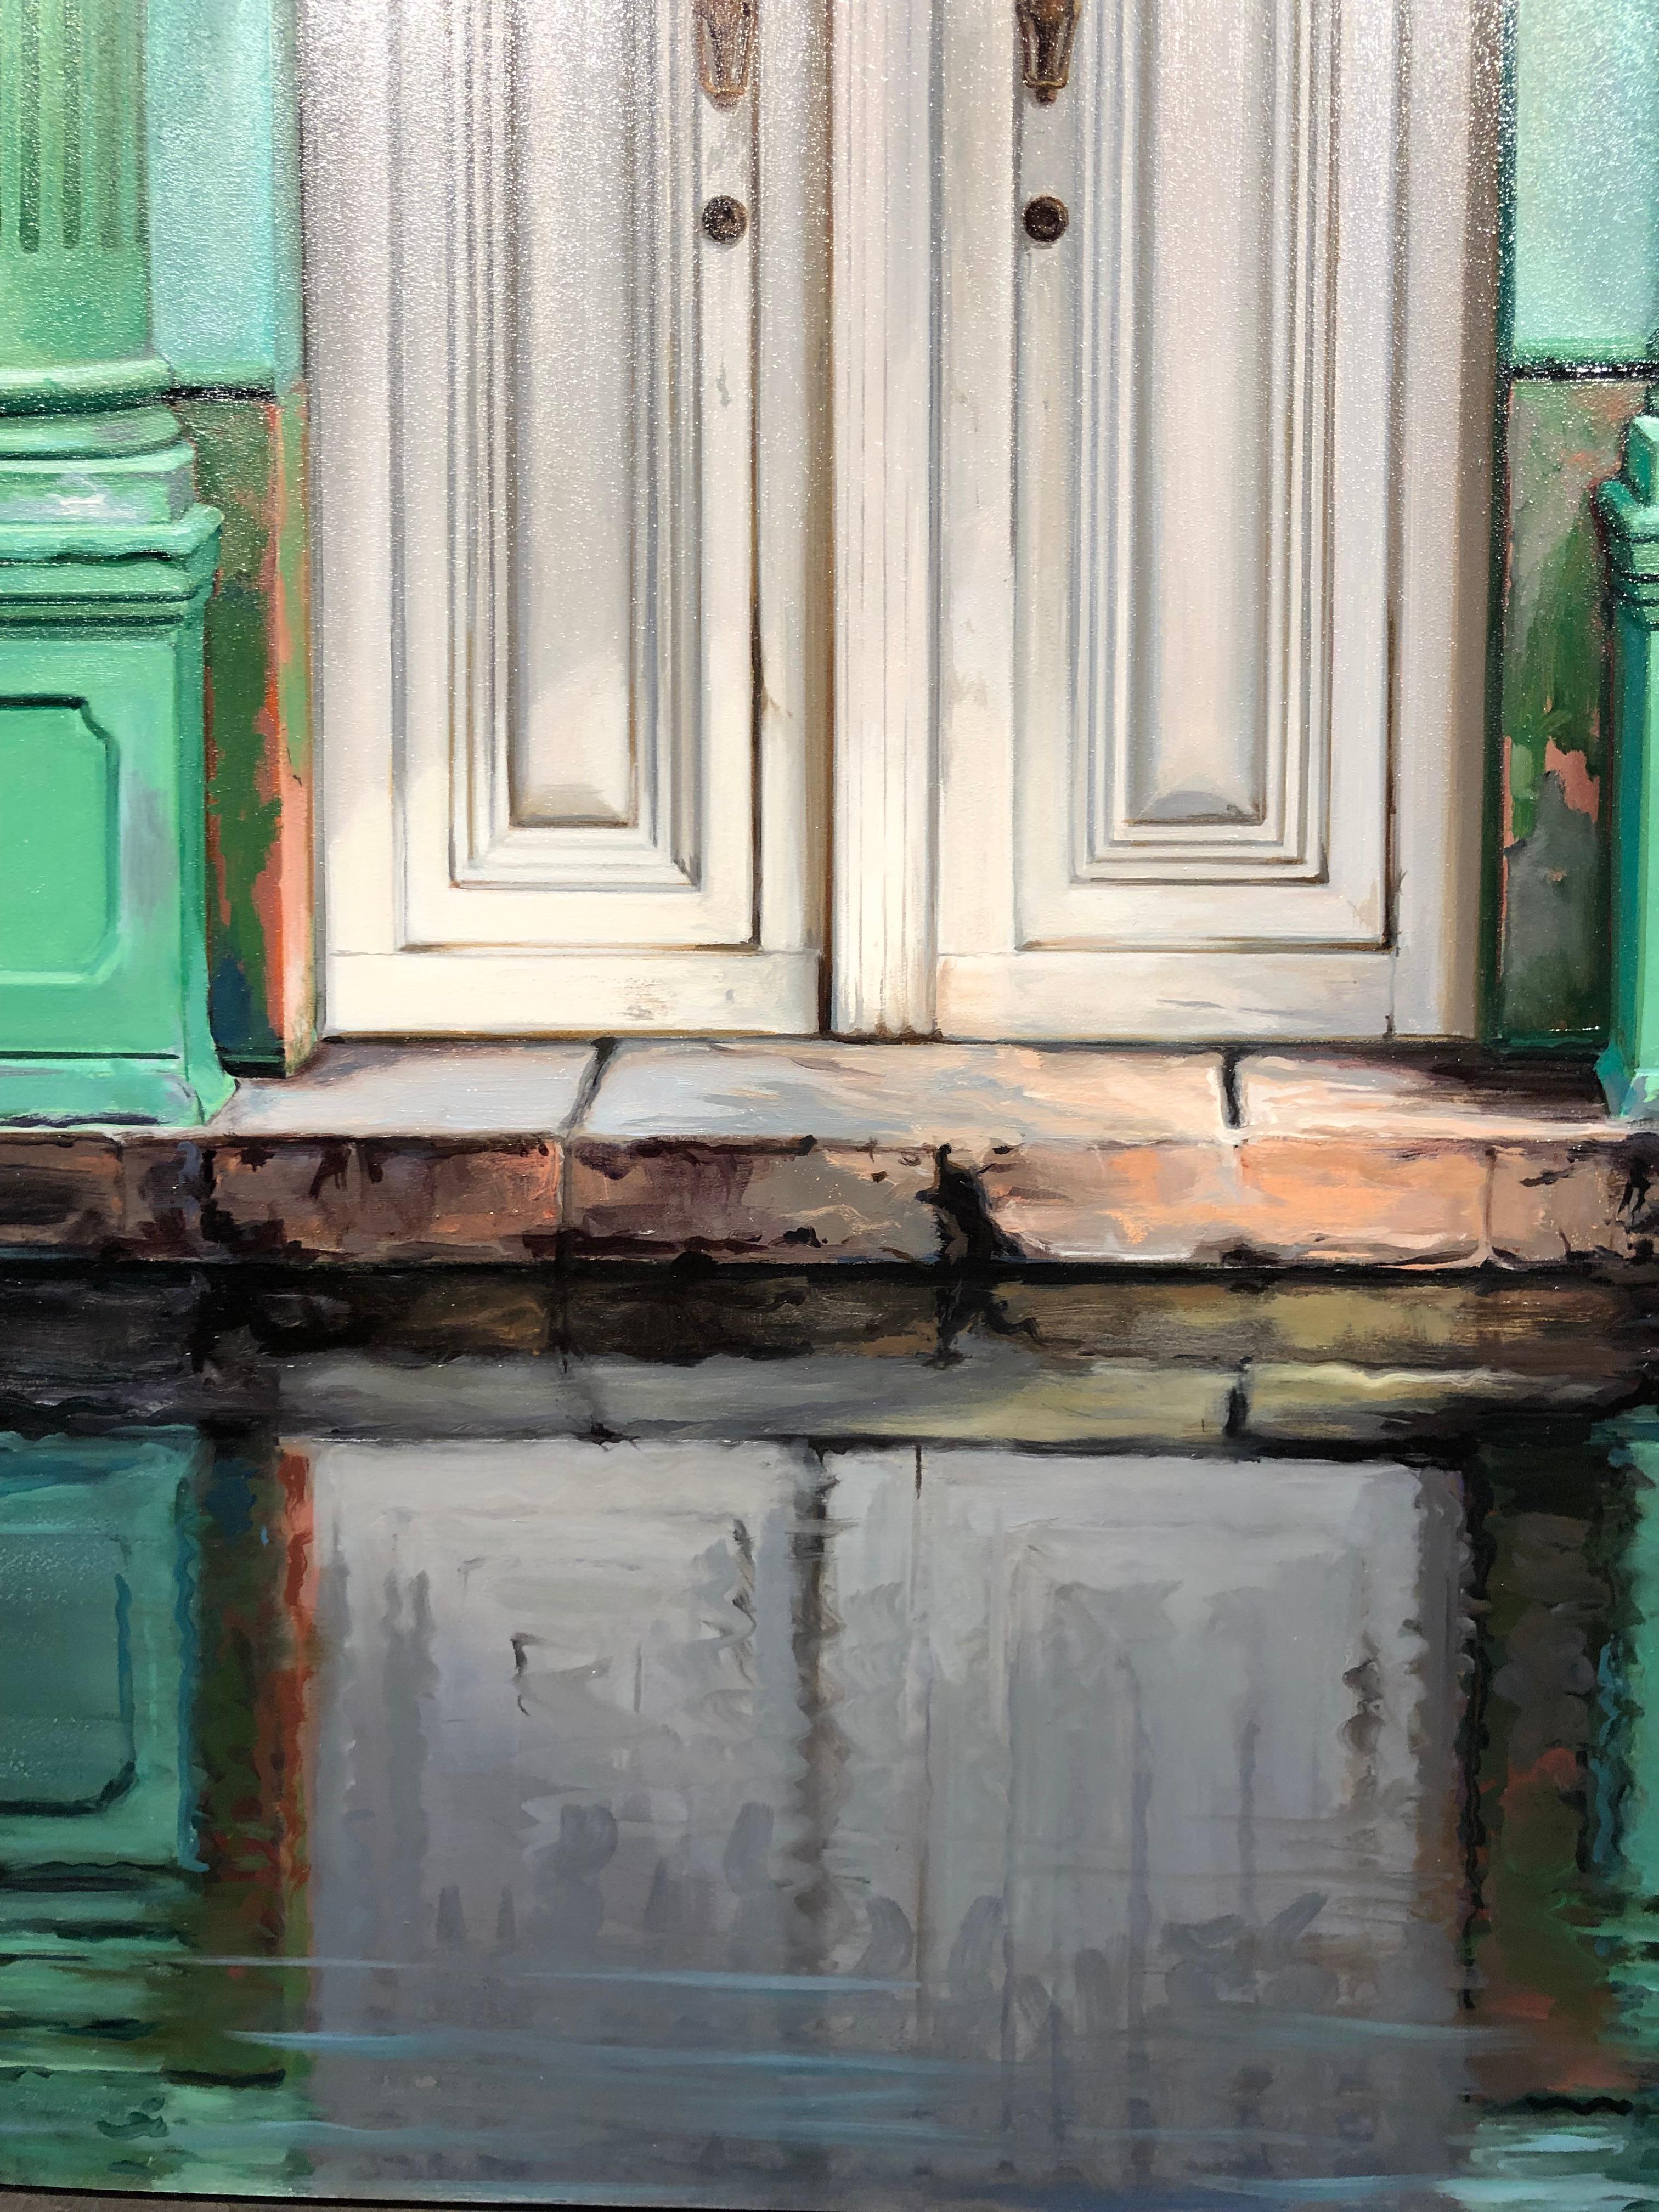 The architectural facade of Carol Pylant's painting entitled 